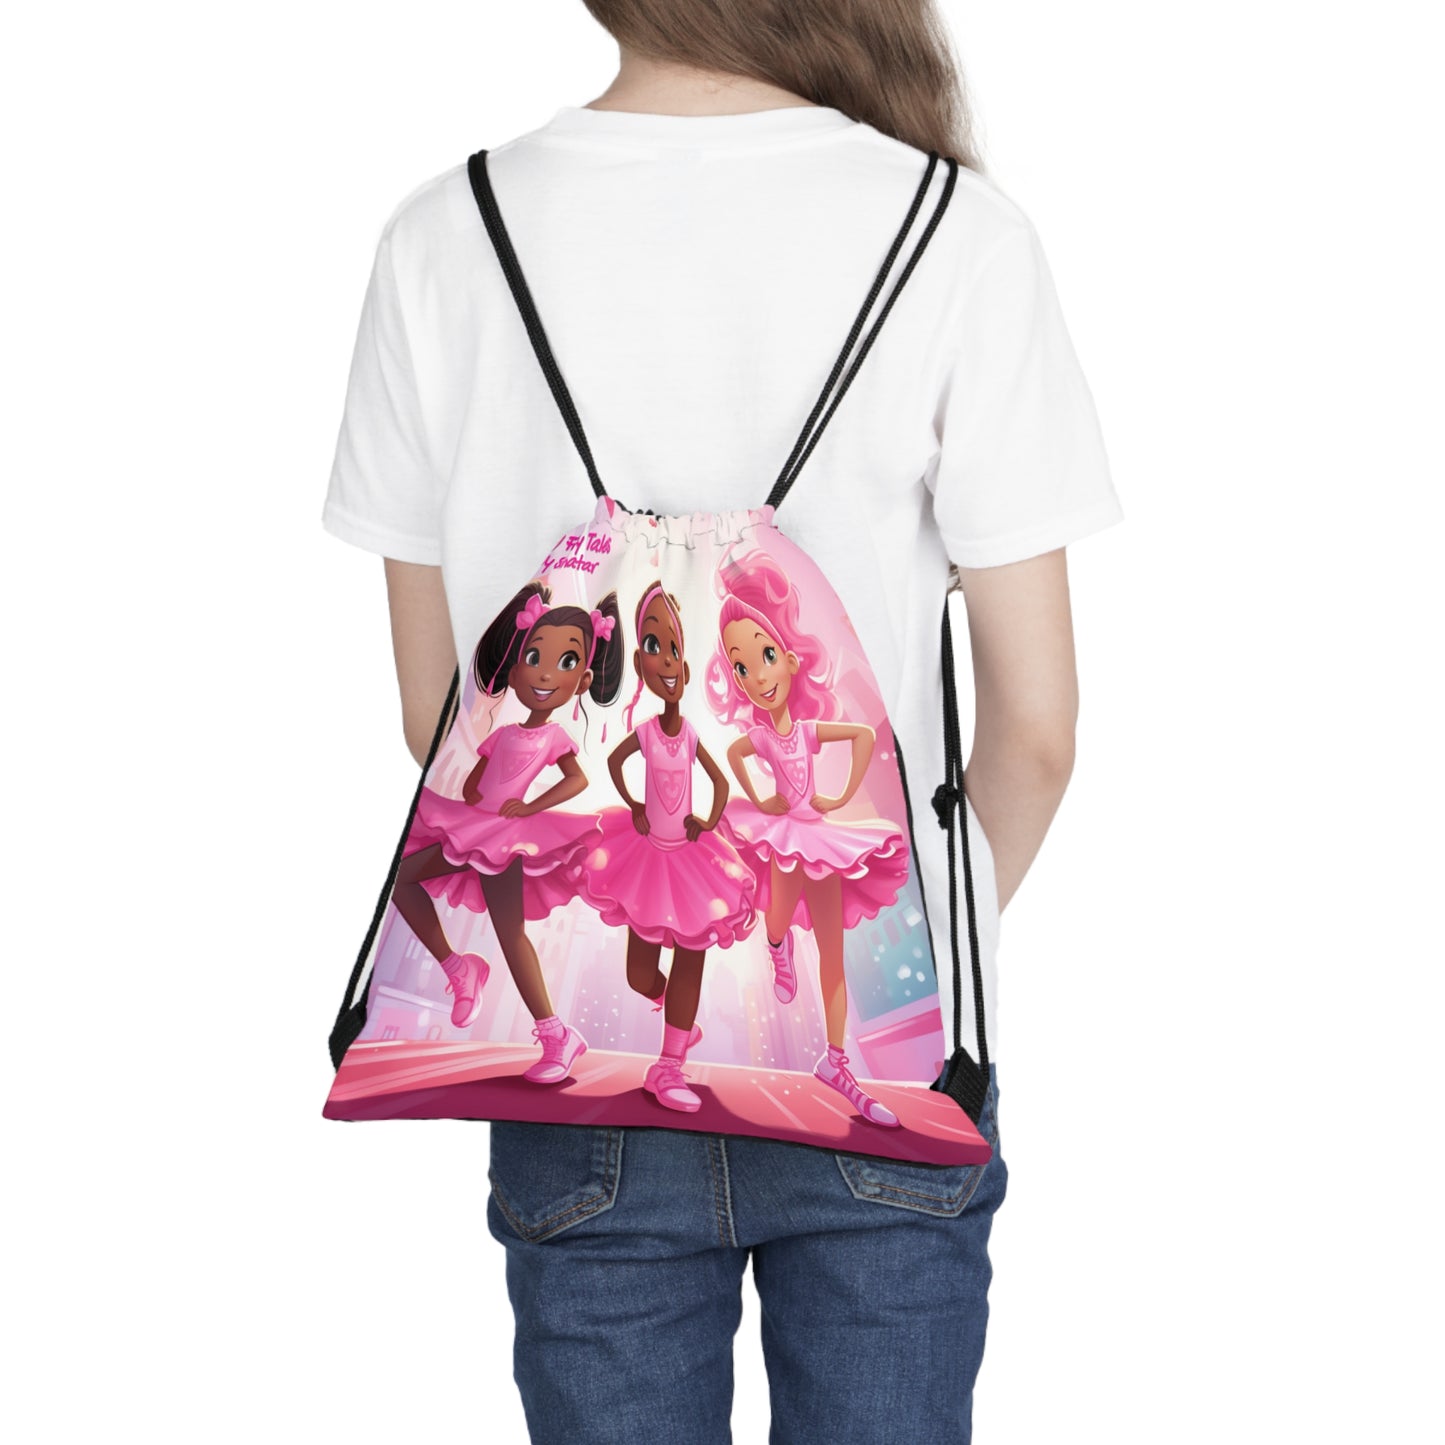 Fairy Tale Pink Tutu Tote From Big Fairy Tales By Schatar